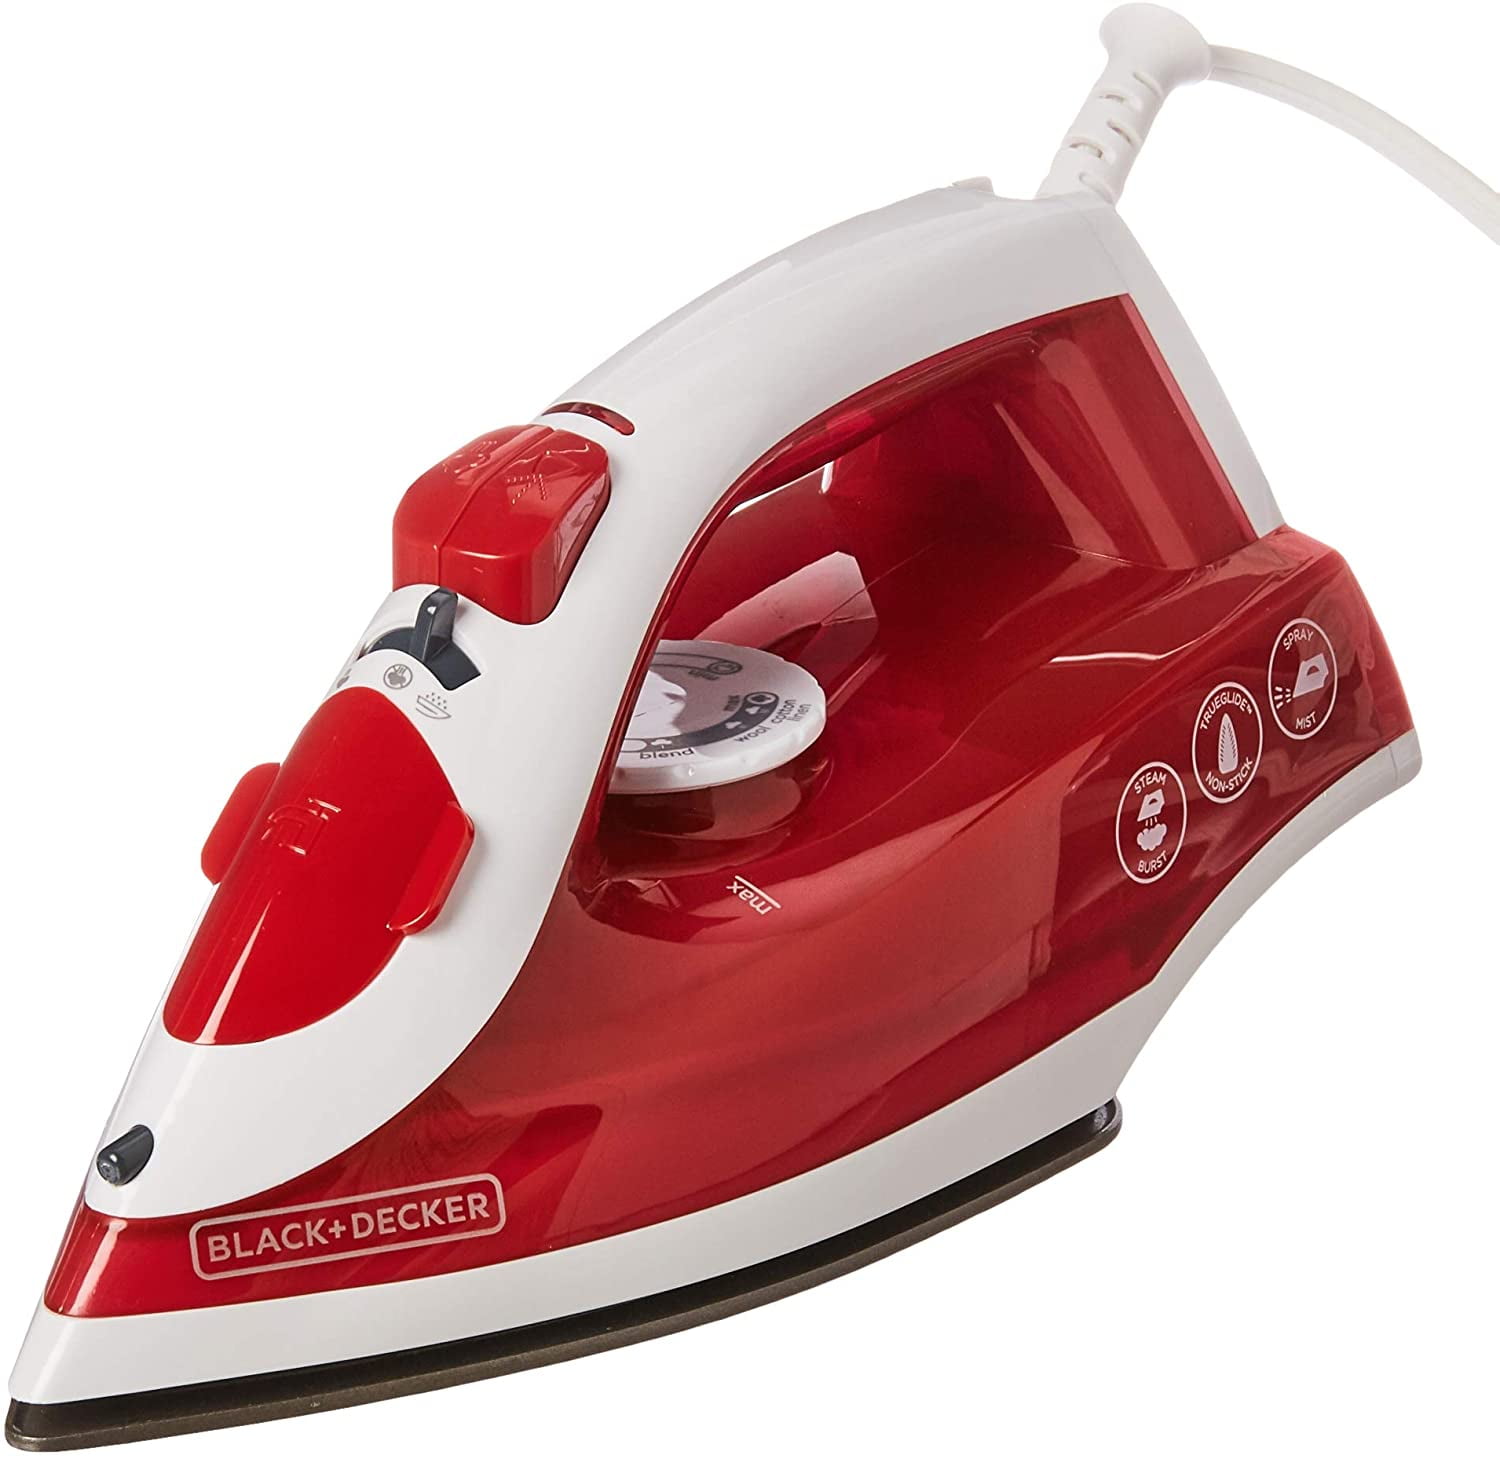 BLACK+DECKER Steam Dry Iron Electric Portable Soleplate Travel Clothes New 